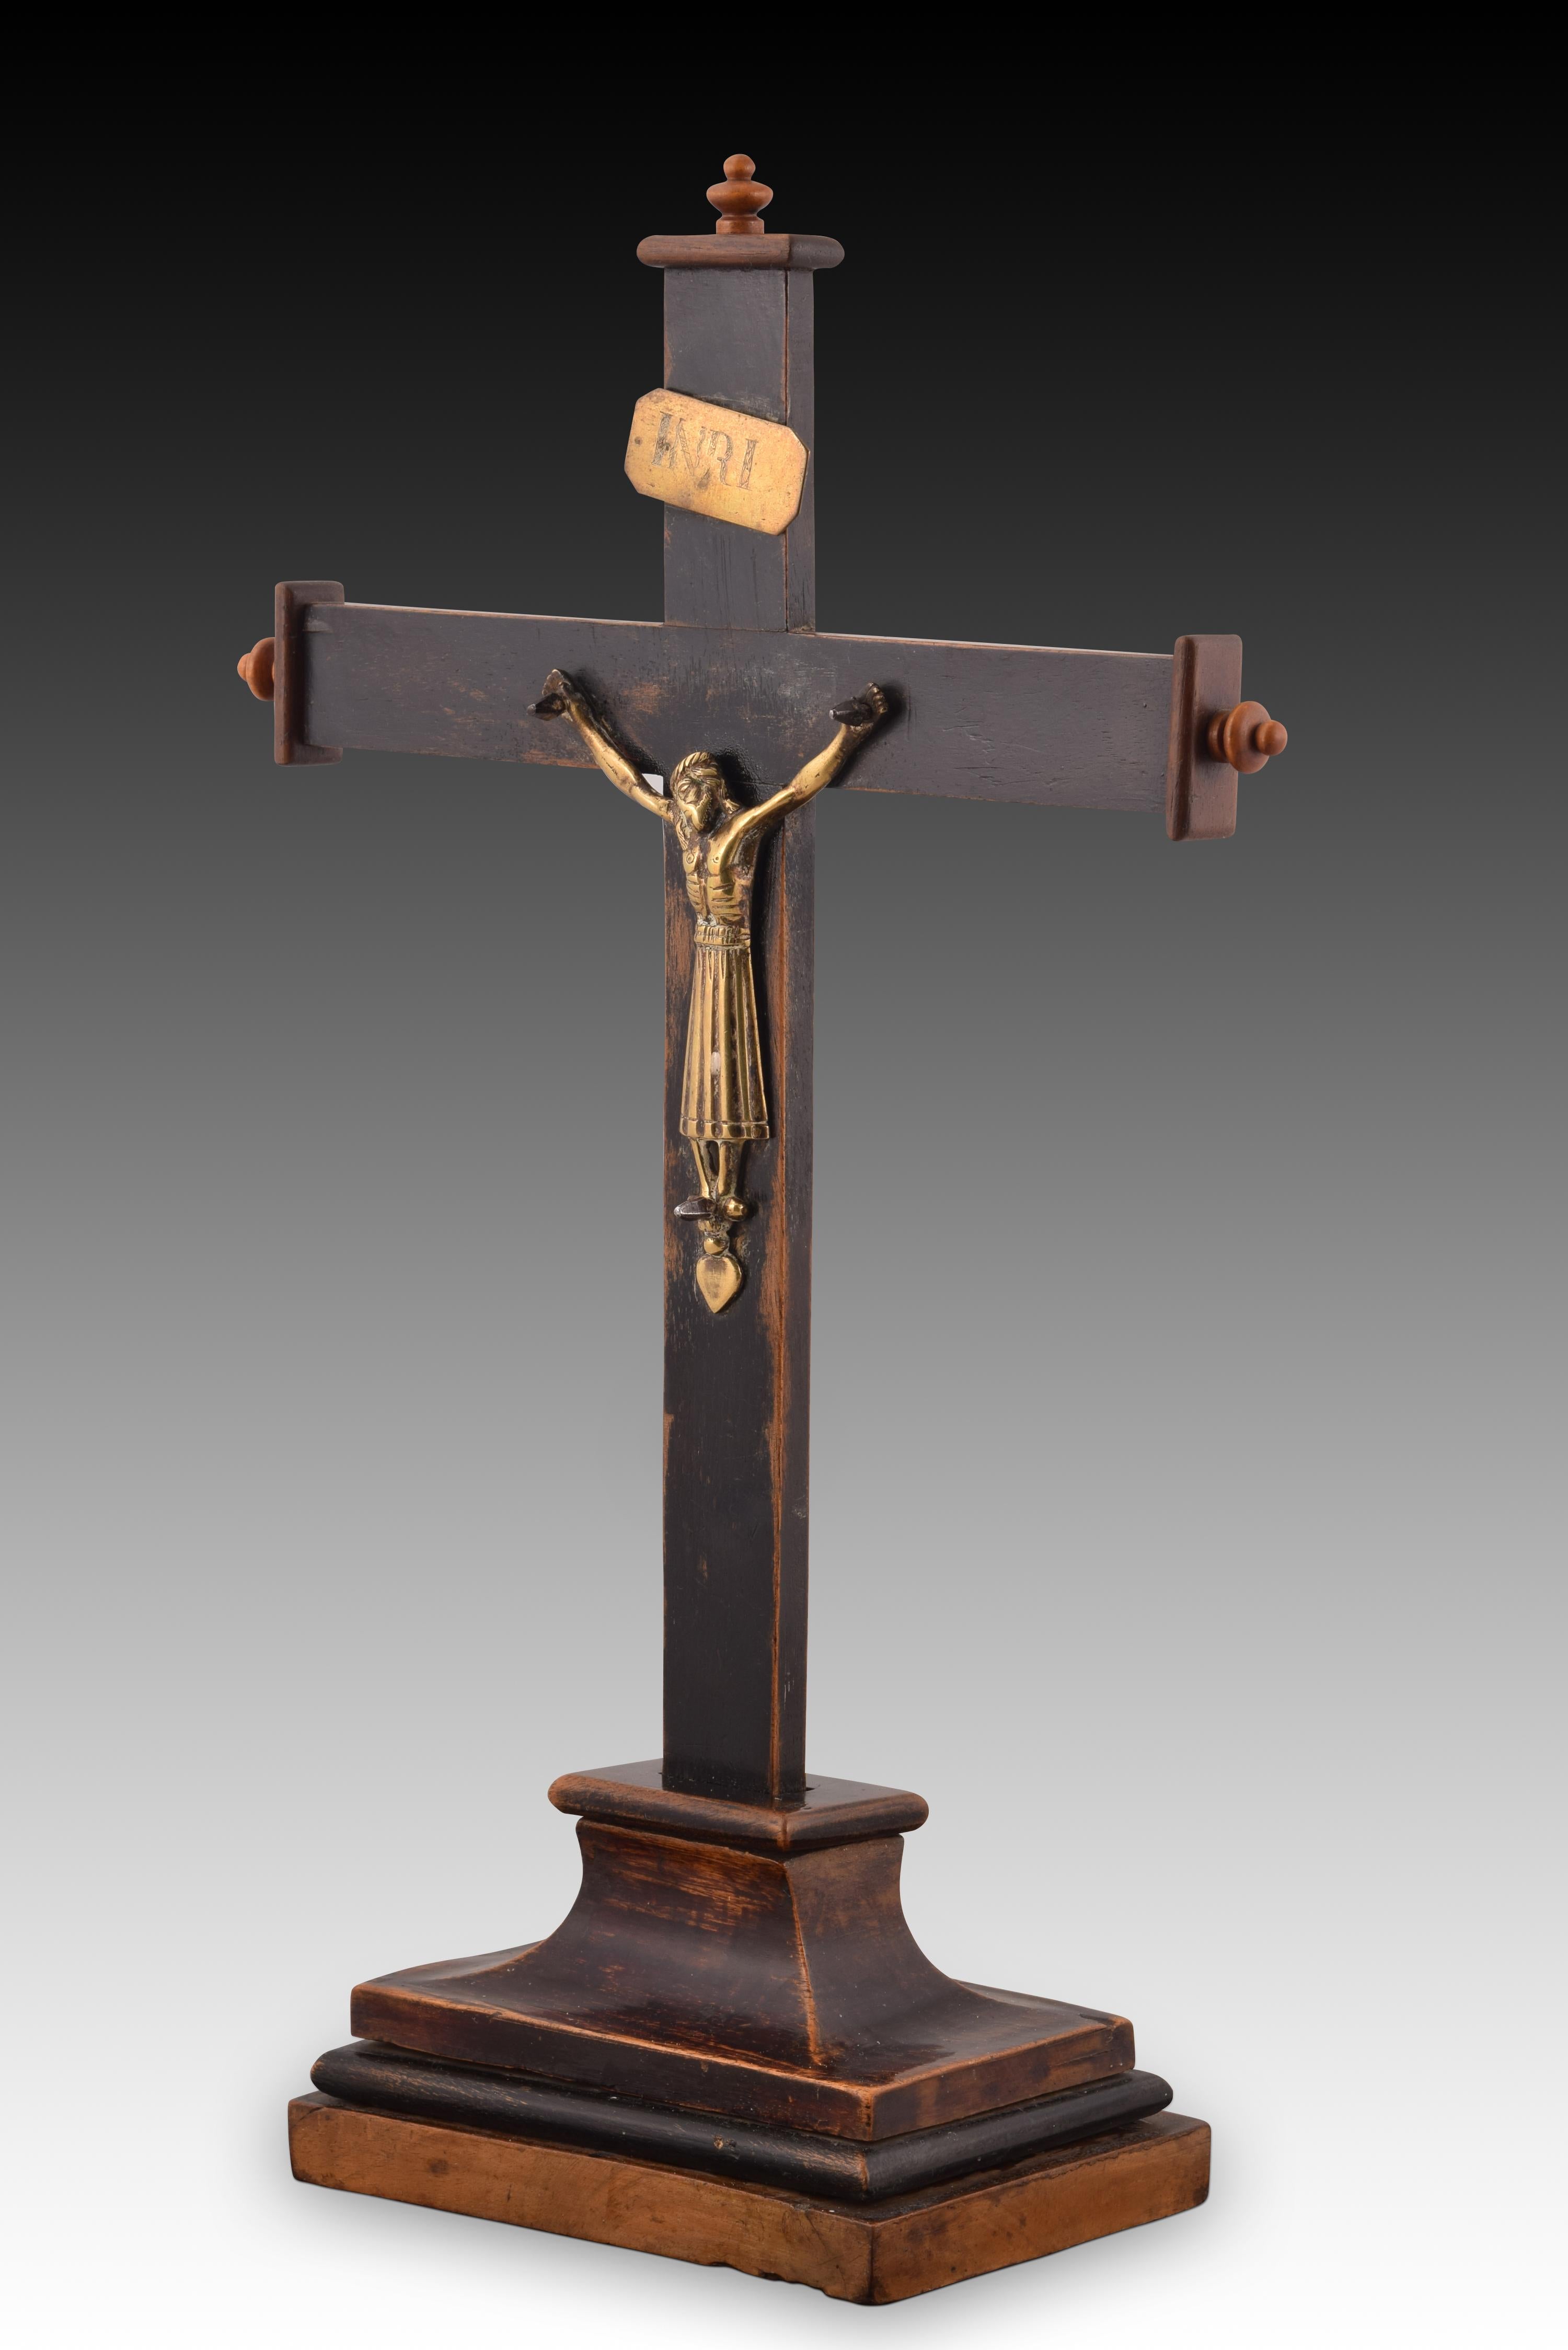 Christ of Burgos. Wood, metal. Spanish school, 19th century.
 A rectangular base serves as the base for a Latin cross with finials at the three upper ends. This has the usual “INRI” label and a particular figure of the Crucified Christ, with a very